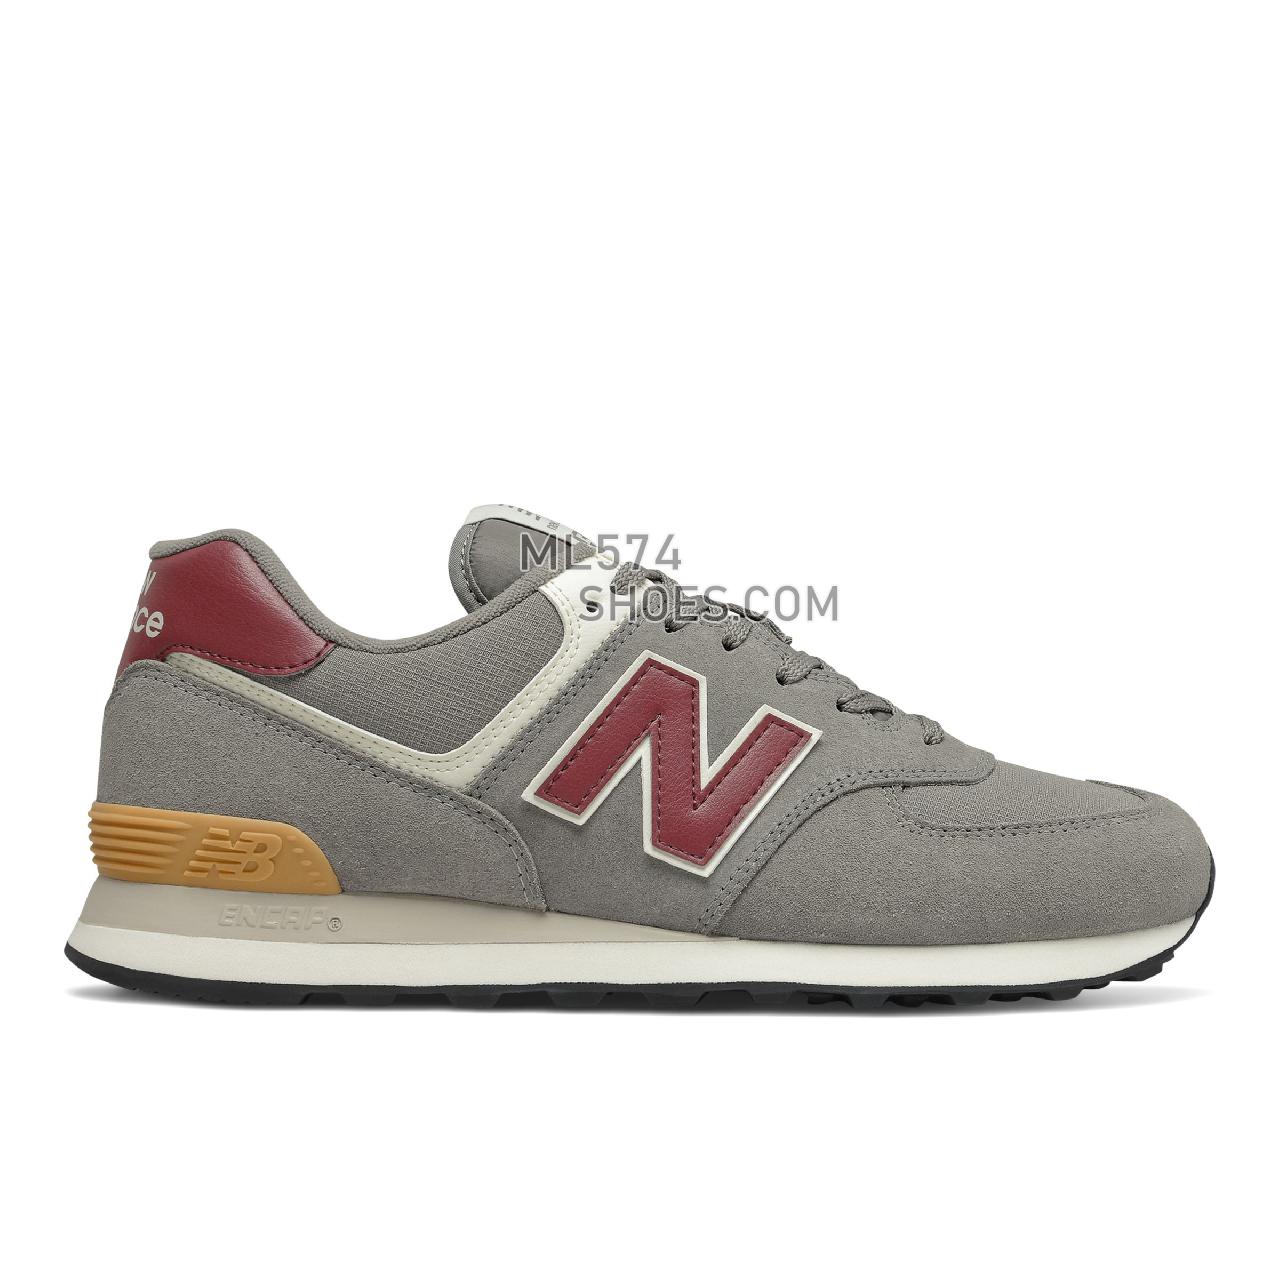 New Balance 574v2 - Men's Classic Sneakers - Marblehead with Light Burgundy - ML574ME2